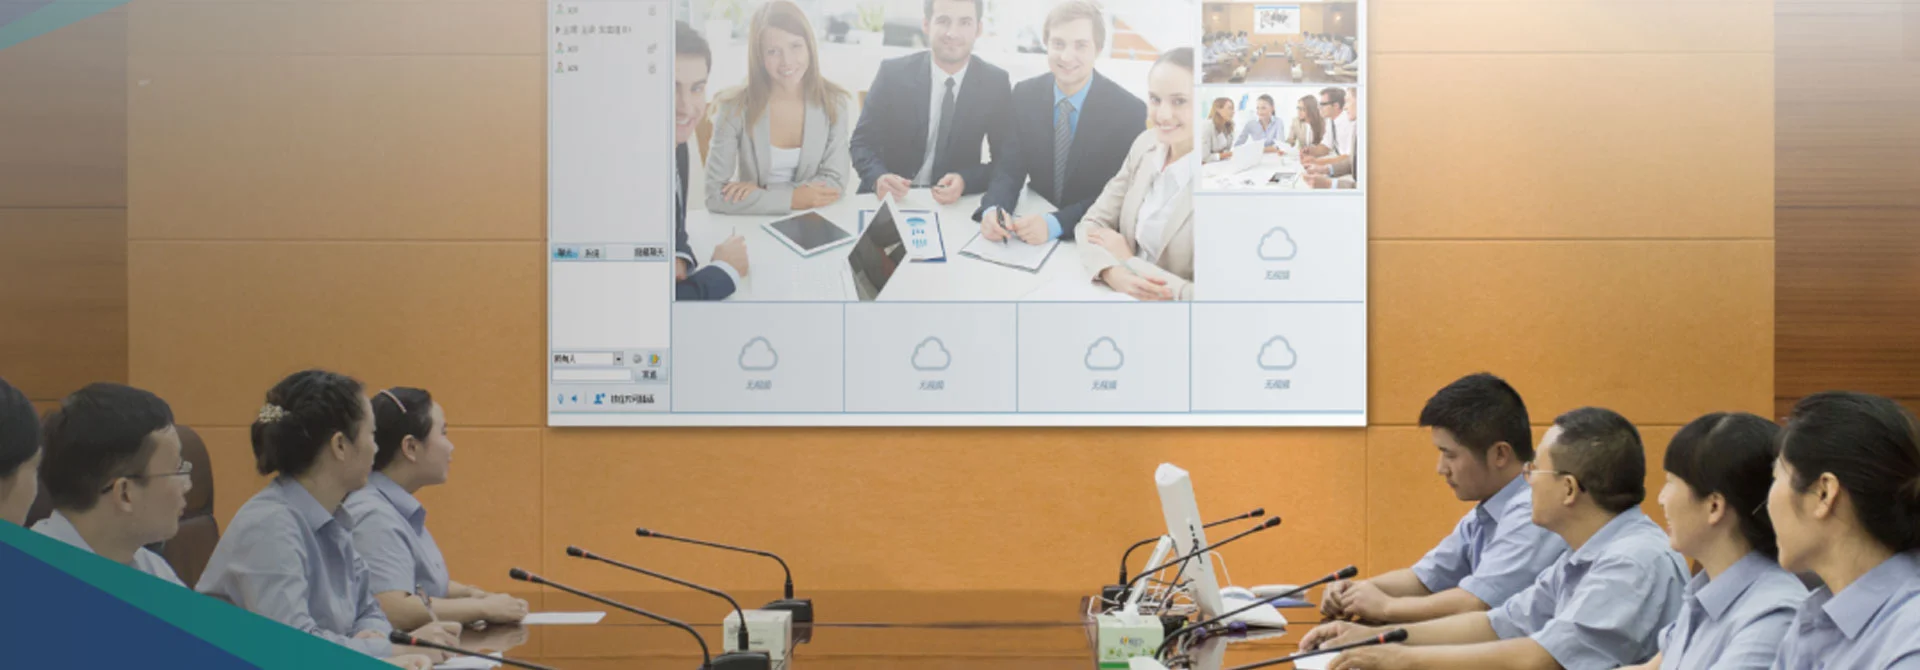 Video Conference Solution for Company Senior Management